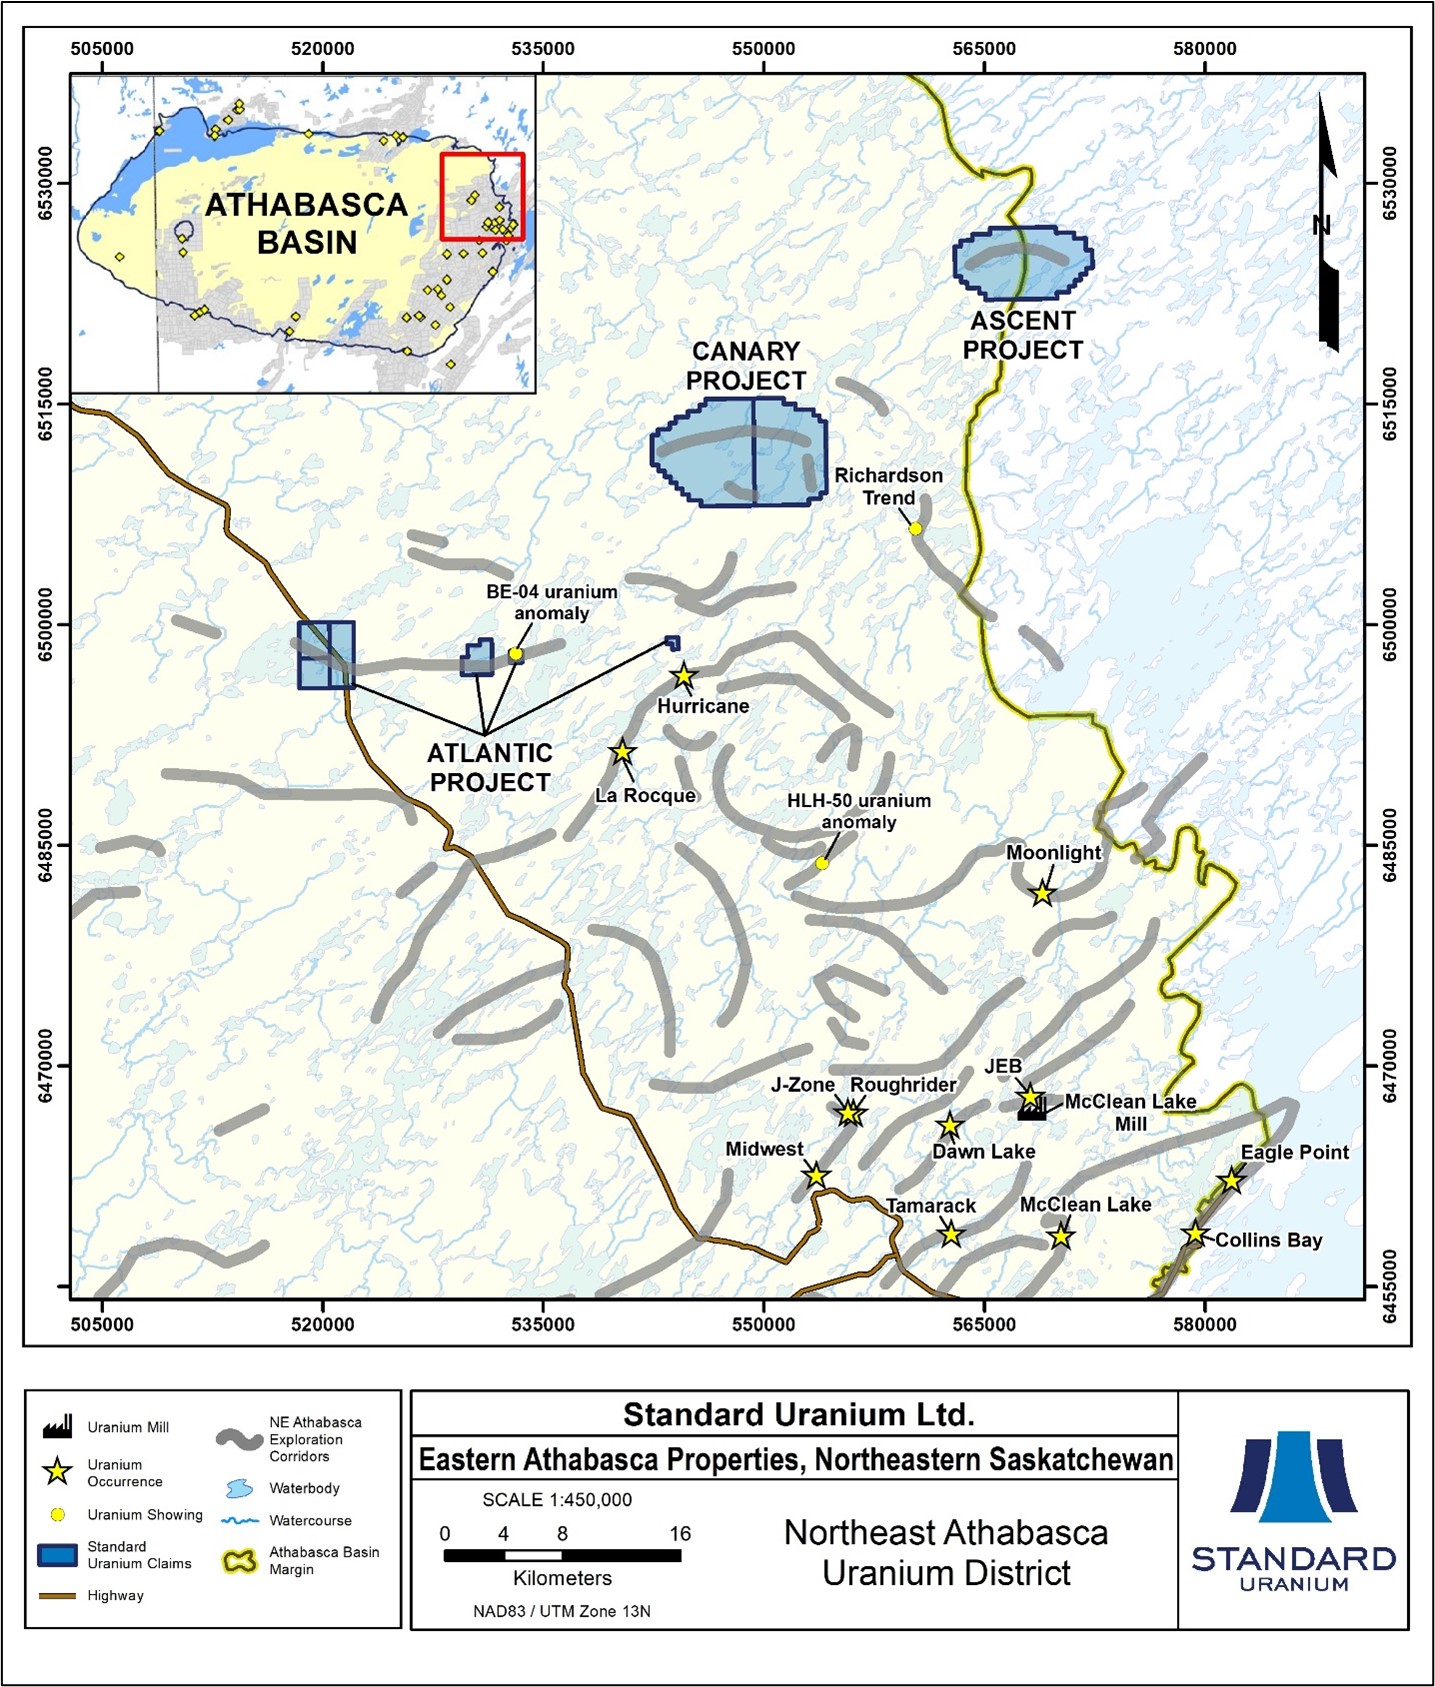 Plan map highlighting Standard Uranium’s eastern Athabasca Projects and exploration trends, with respect to current uranium showings, discoveries, and deposits.